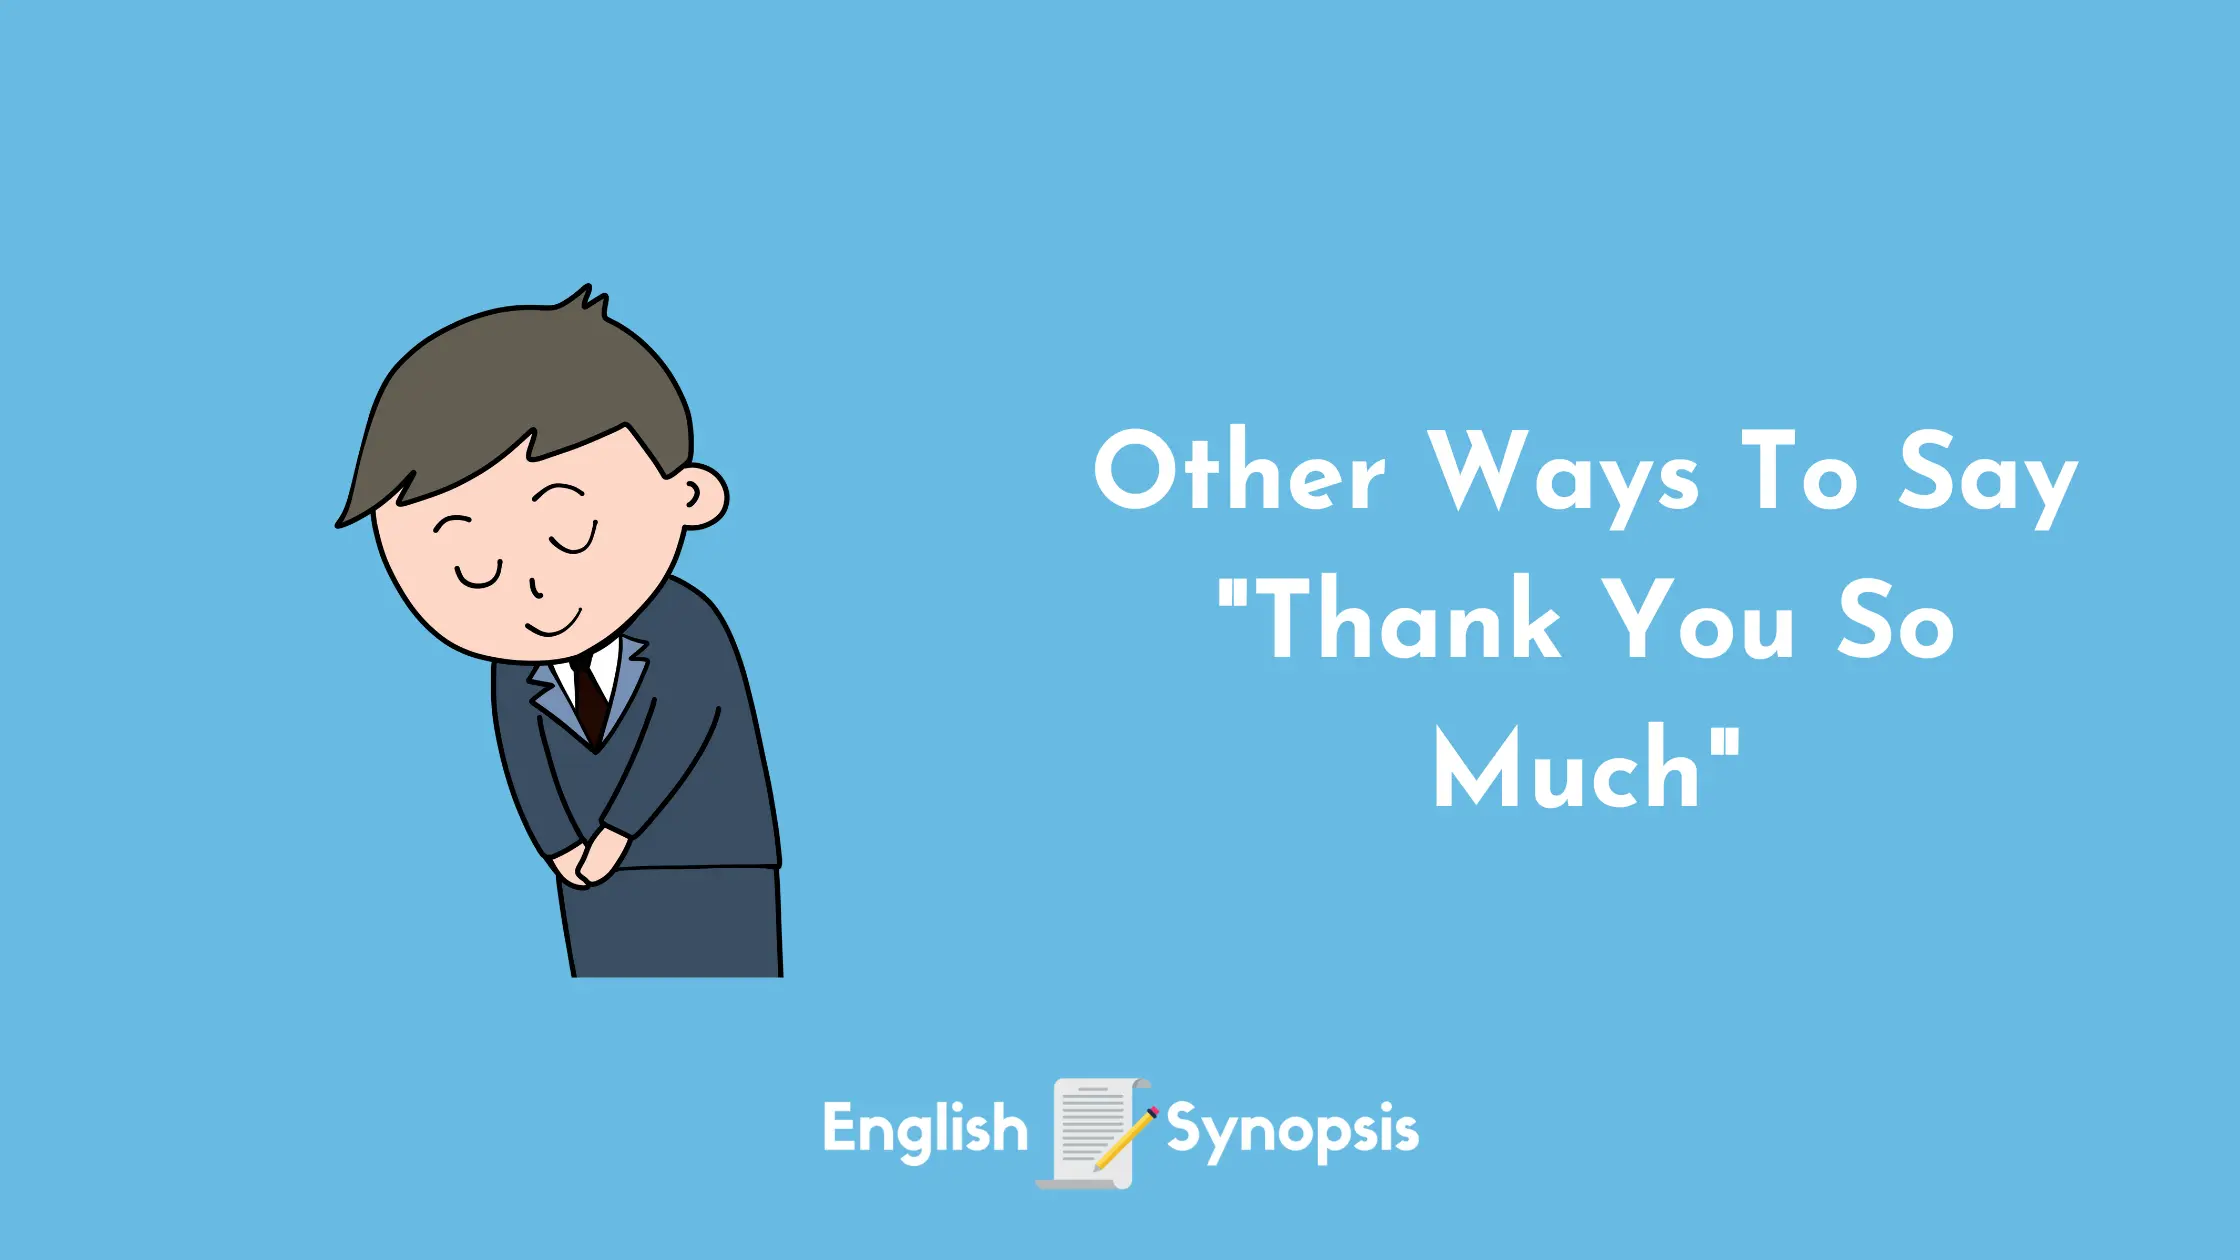 Other Ways To Say "Thank You So Much"